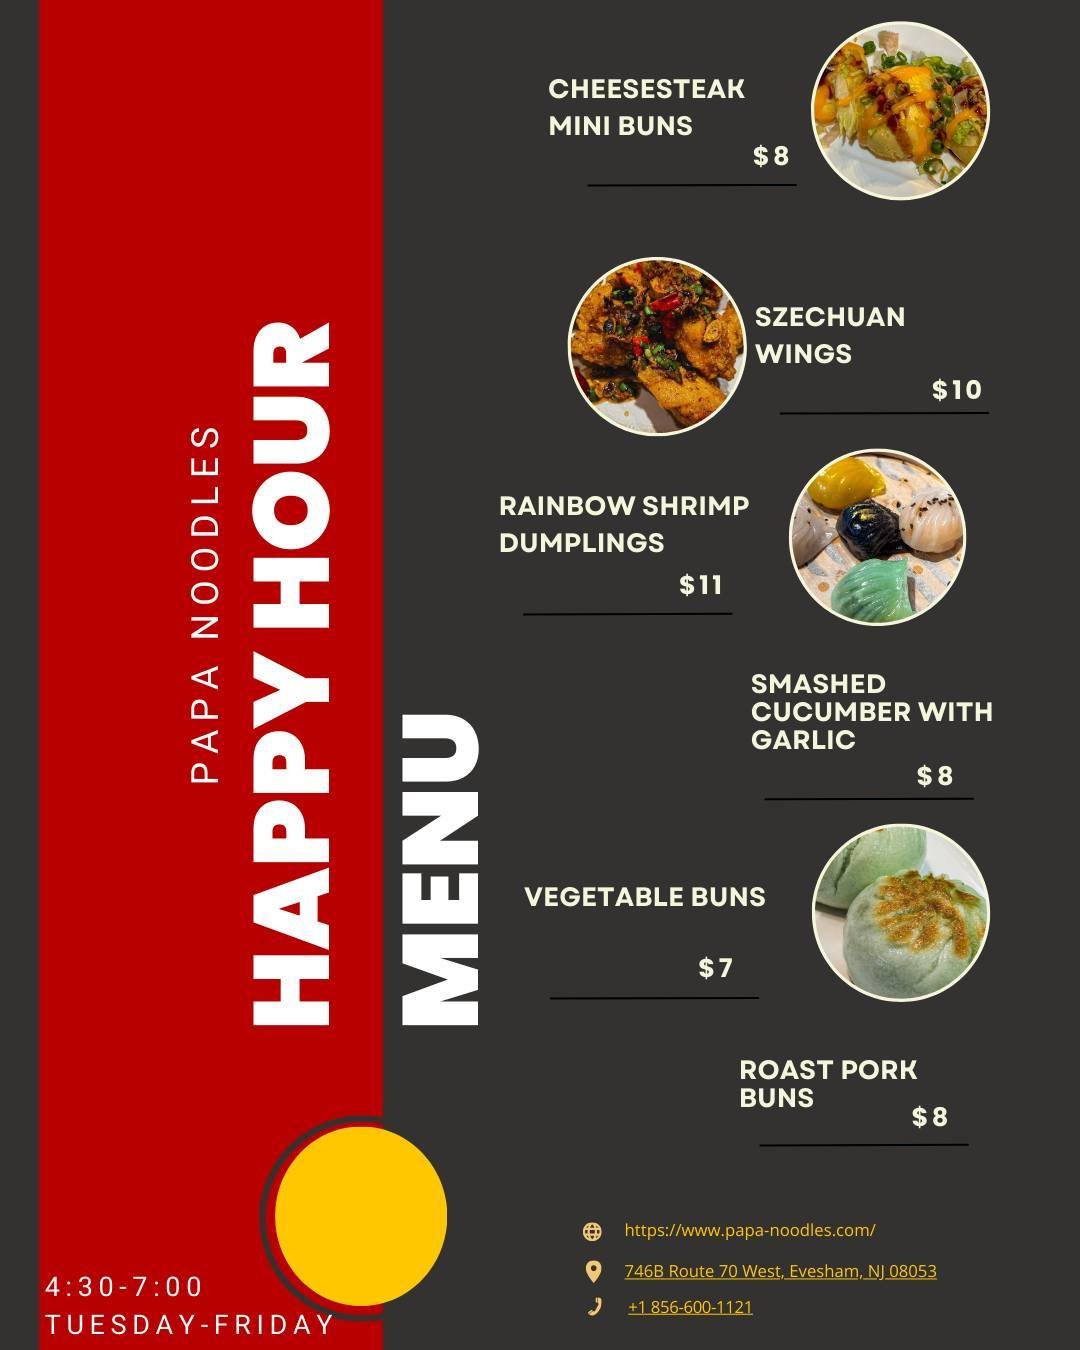 ICYMI! Happy Hour menu specials are available now, with our cheesesteak mini buns to vegetable buns. Meals for everyone to be enjoyed by everyone. 

#papanoodles #dimsum #happyhourmenu #phillyhappyhour #eatingout